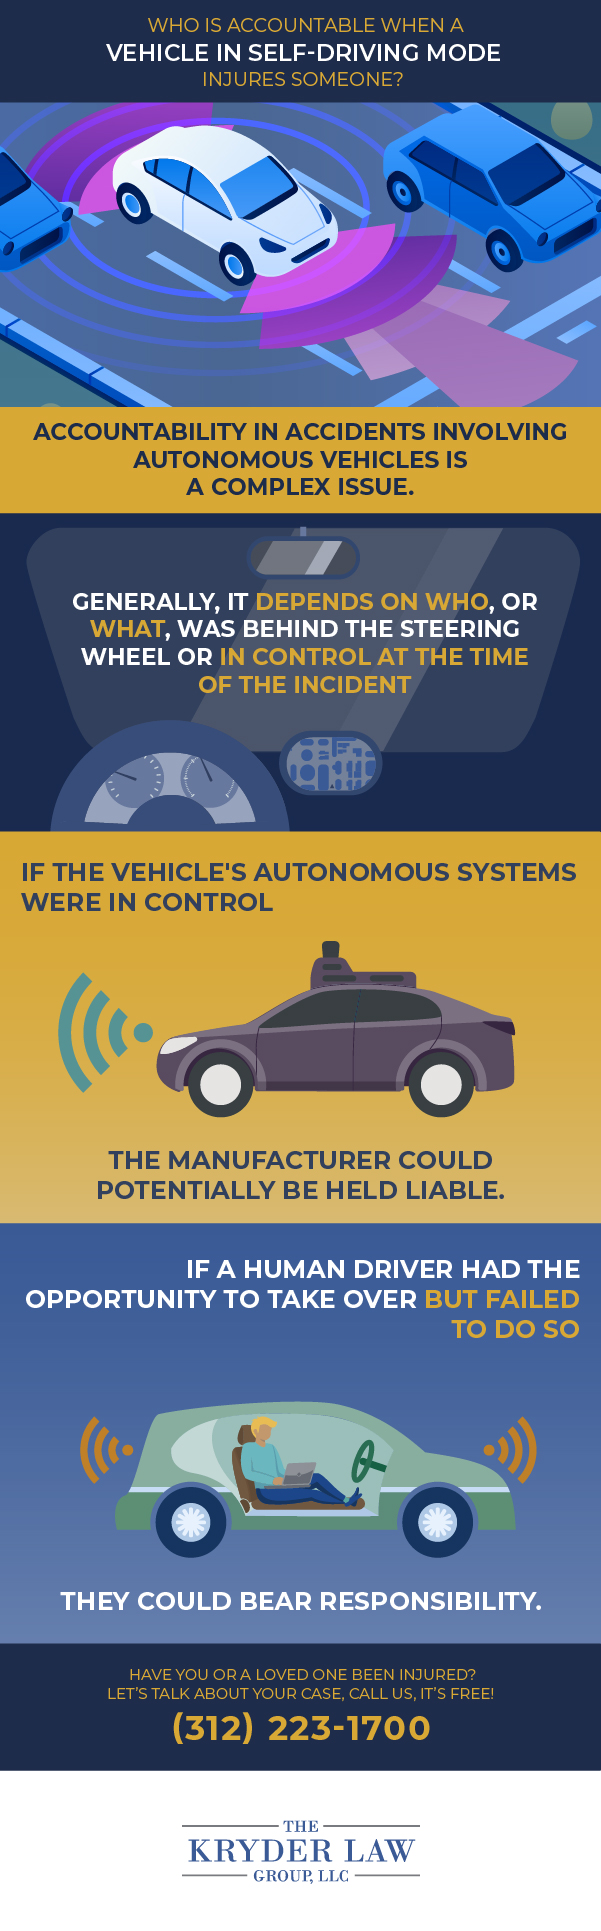 Who is Accountable When a Vehicle in Self-Driving Mode Injuries Someone?